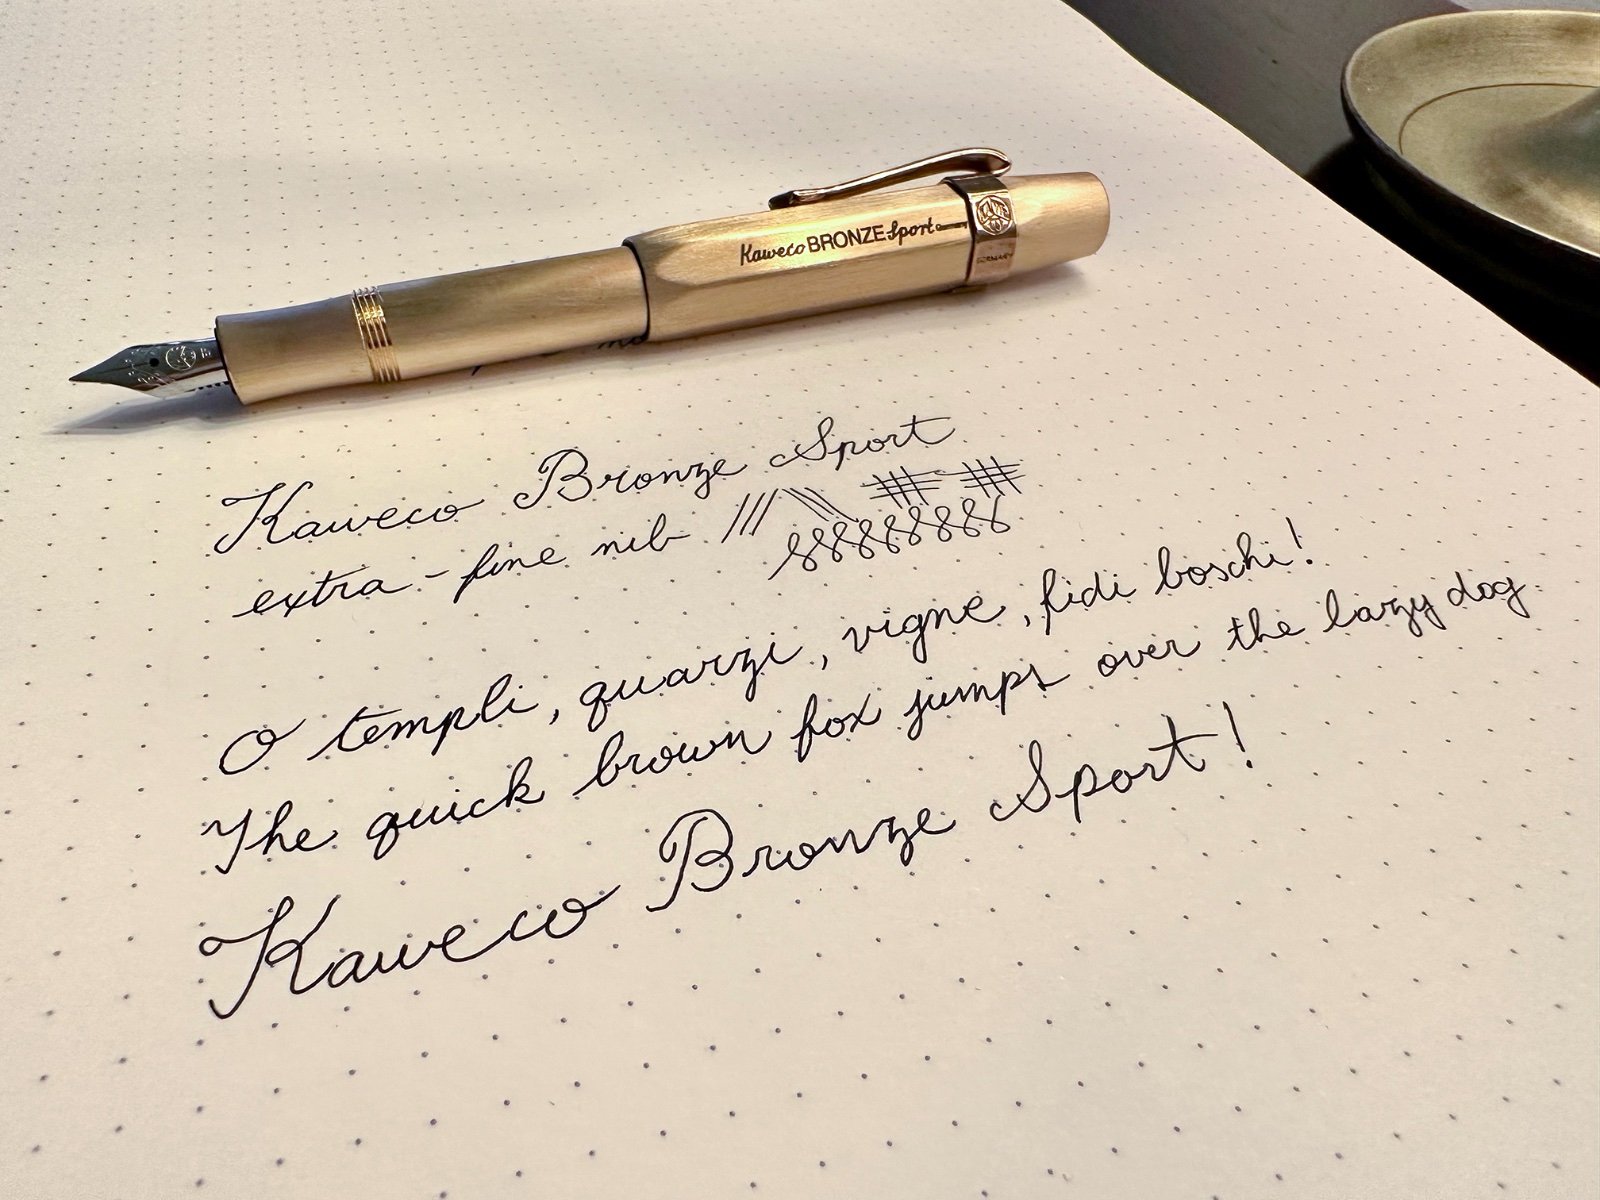 The new Bronze Kaweco Sport is an excellent edition to my Brass